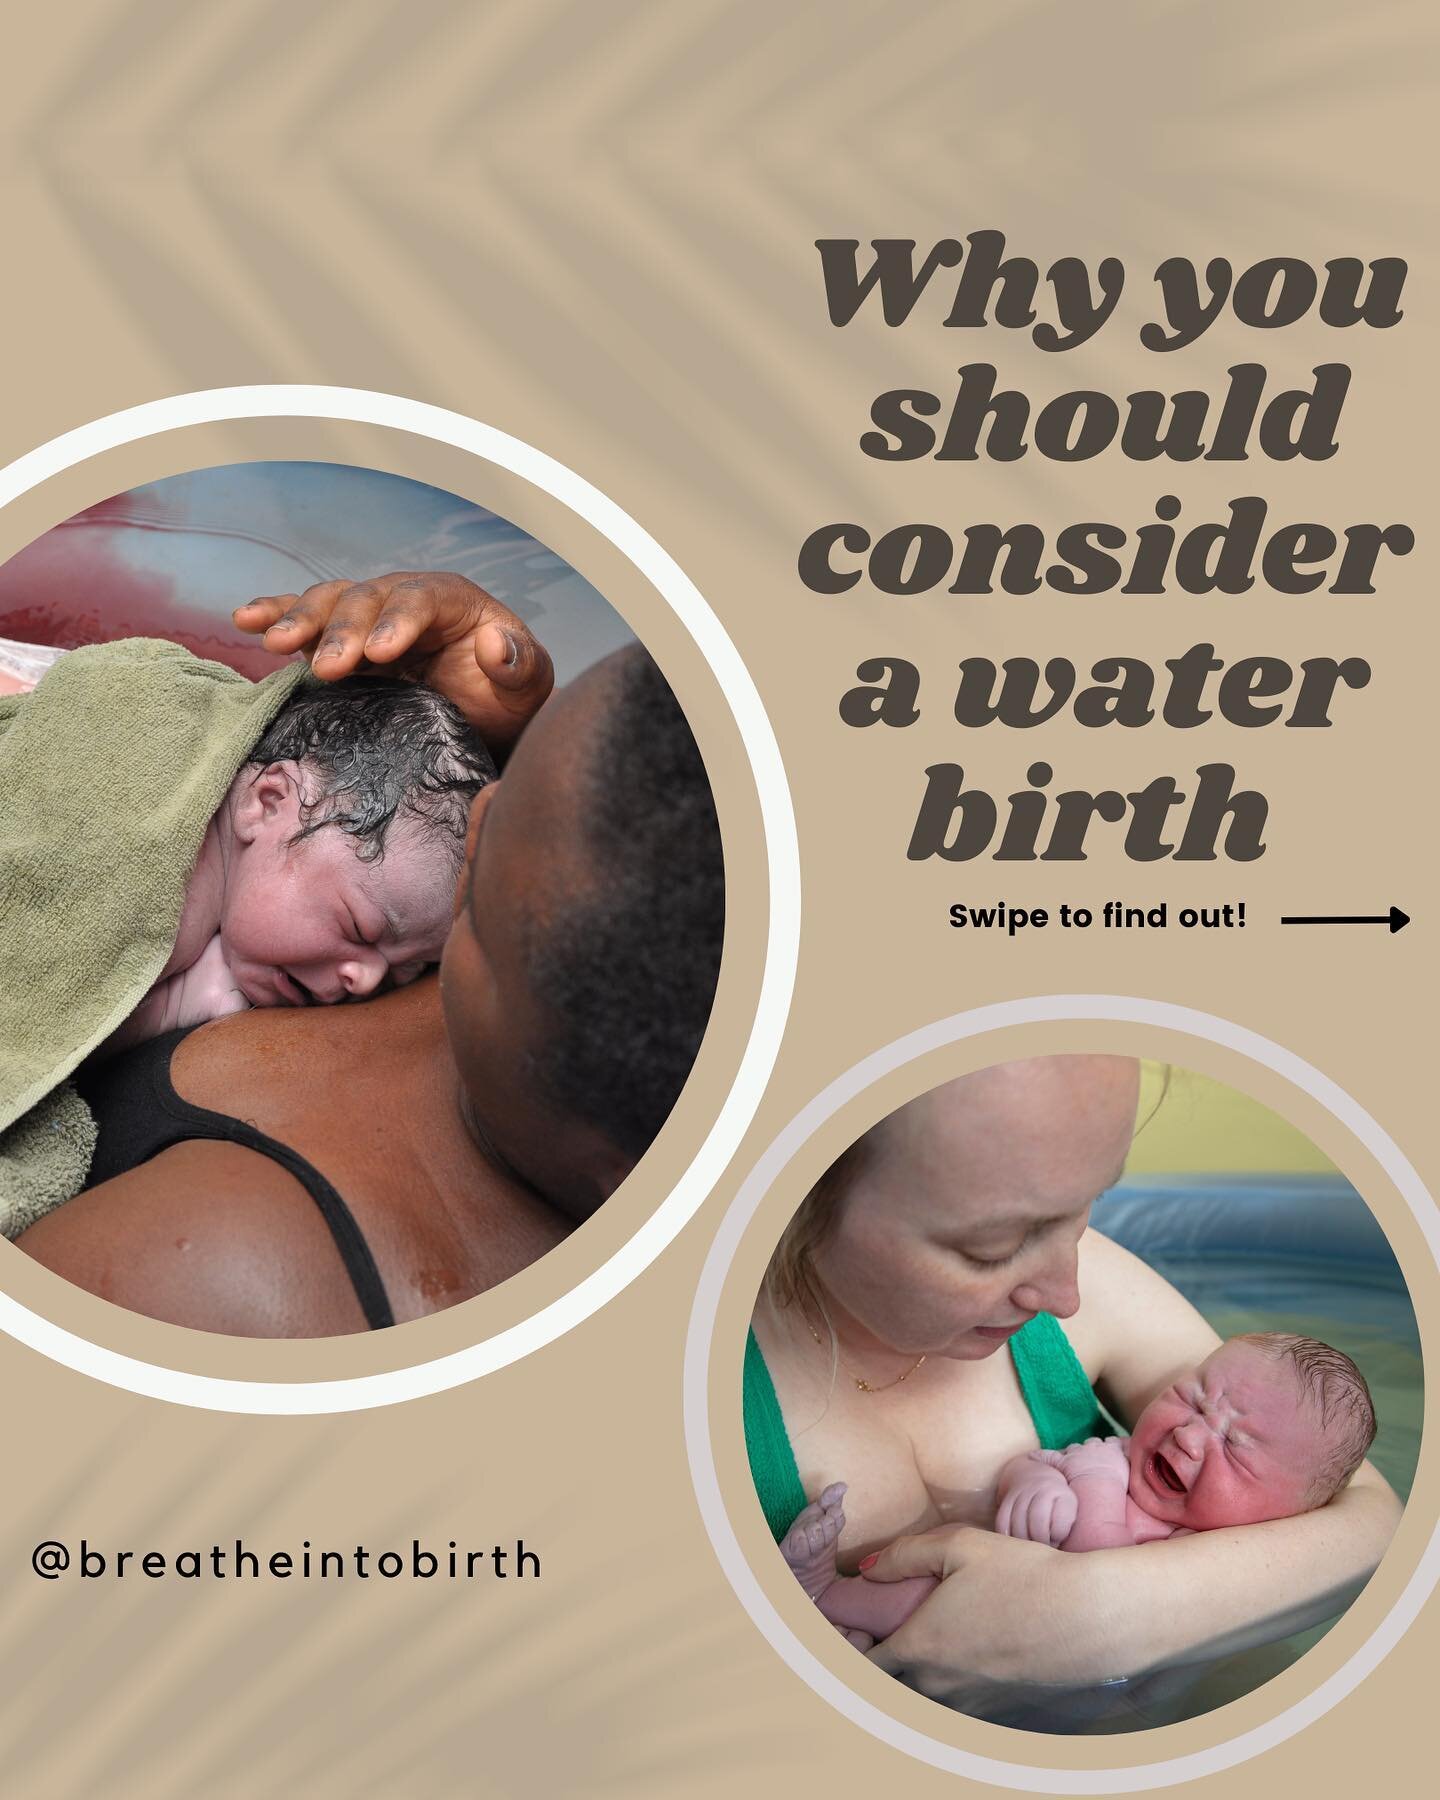 Honestly I LOVE a water birth purely because in most cases it totally improves a women&rsquo;s birth experience by offering her more privacy and comfort! 

Have you ever had a water birth before? How did you find it? Was it a love or hate experience?